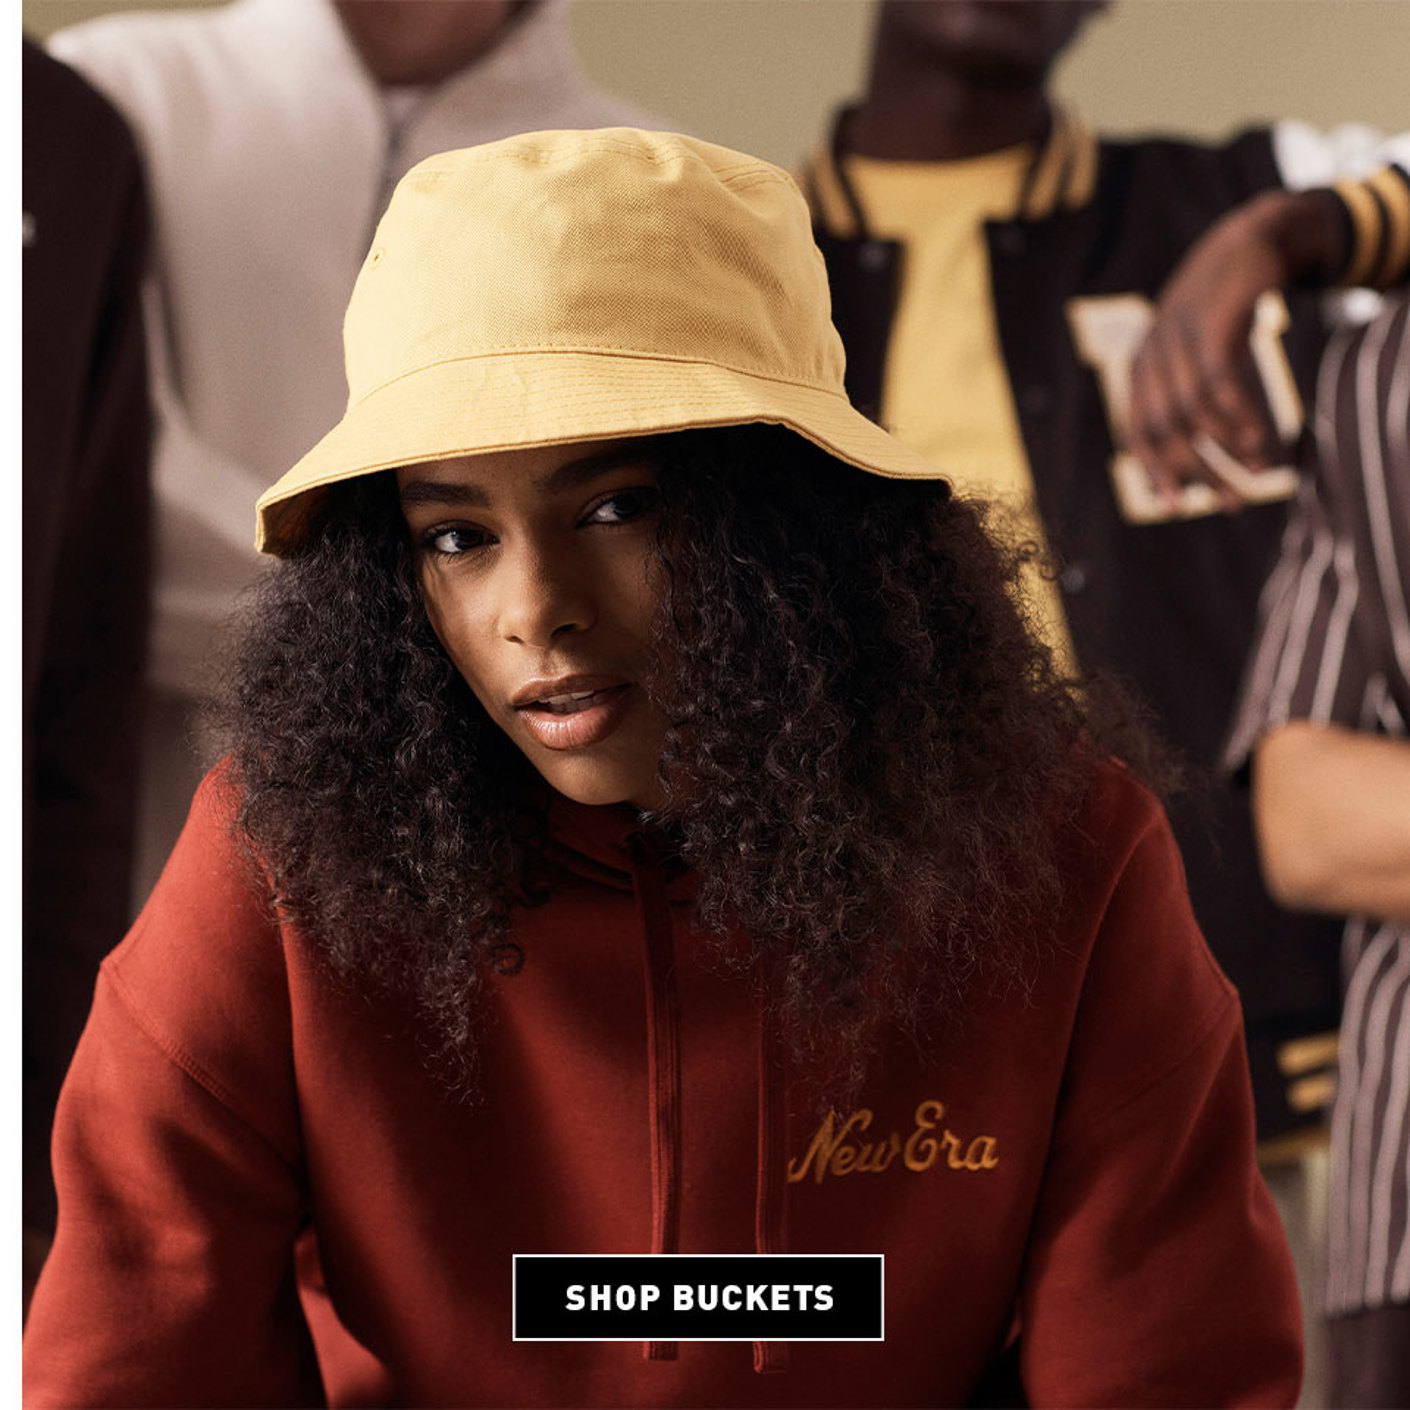 Button to shop New Era's Bucket hats collection